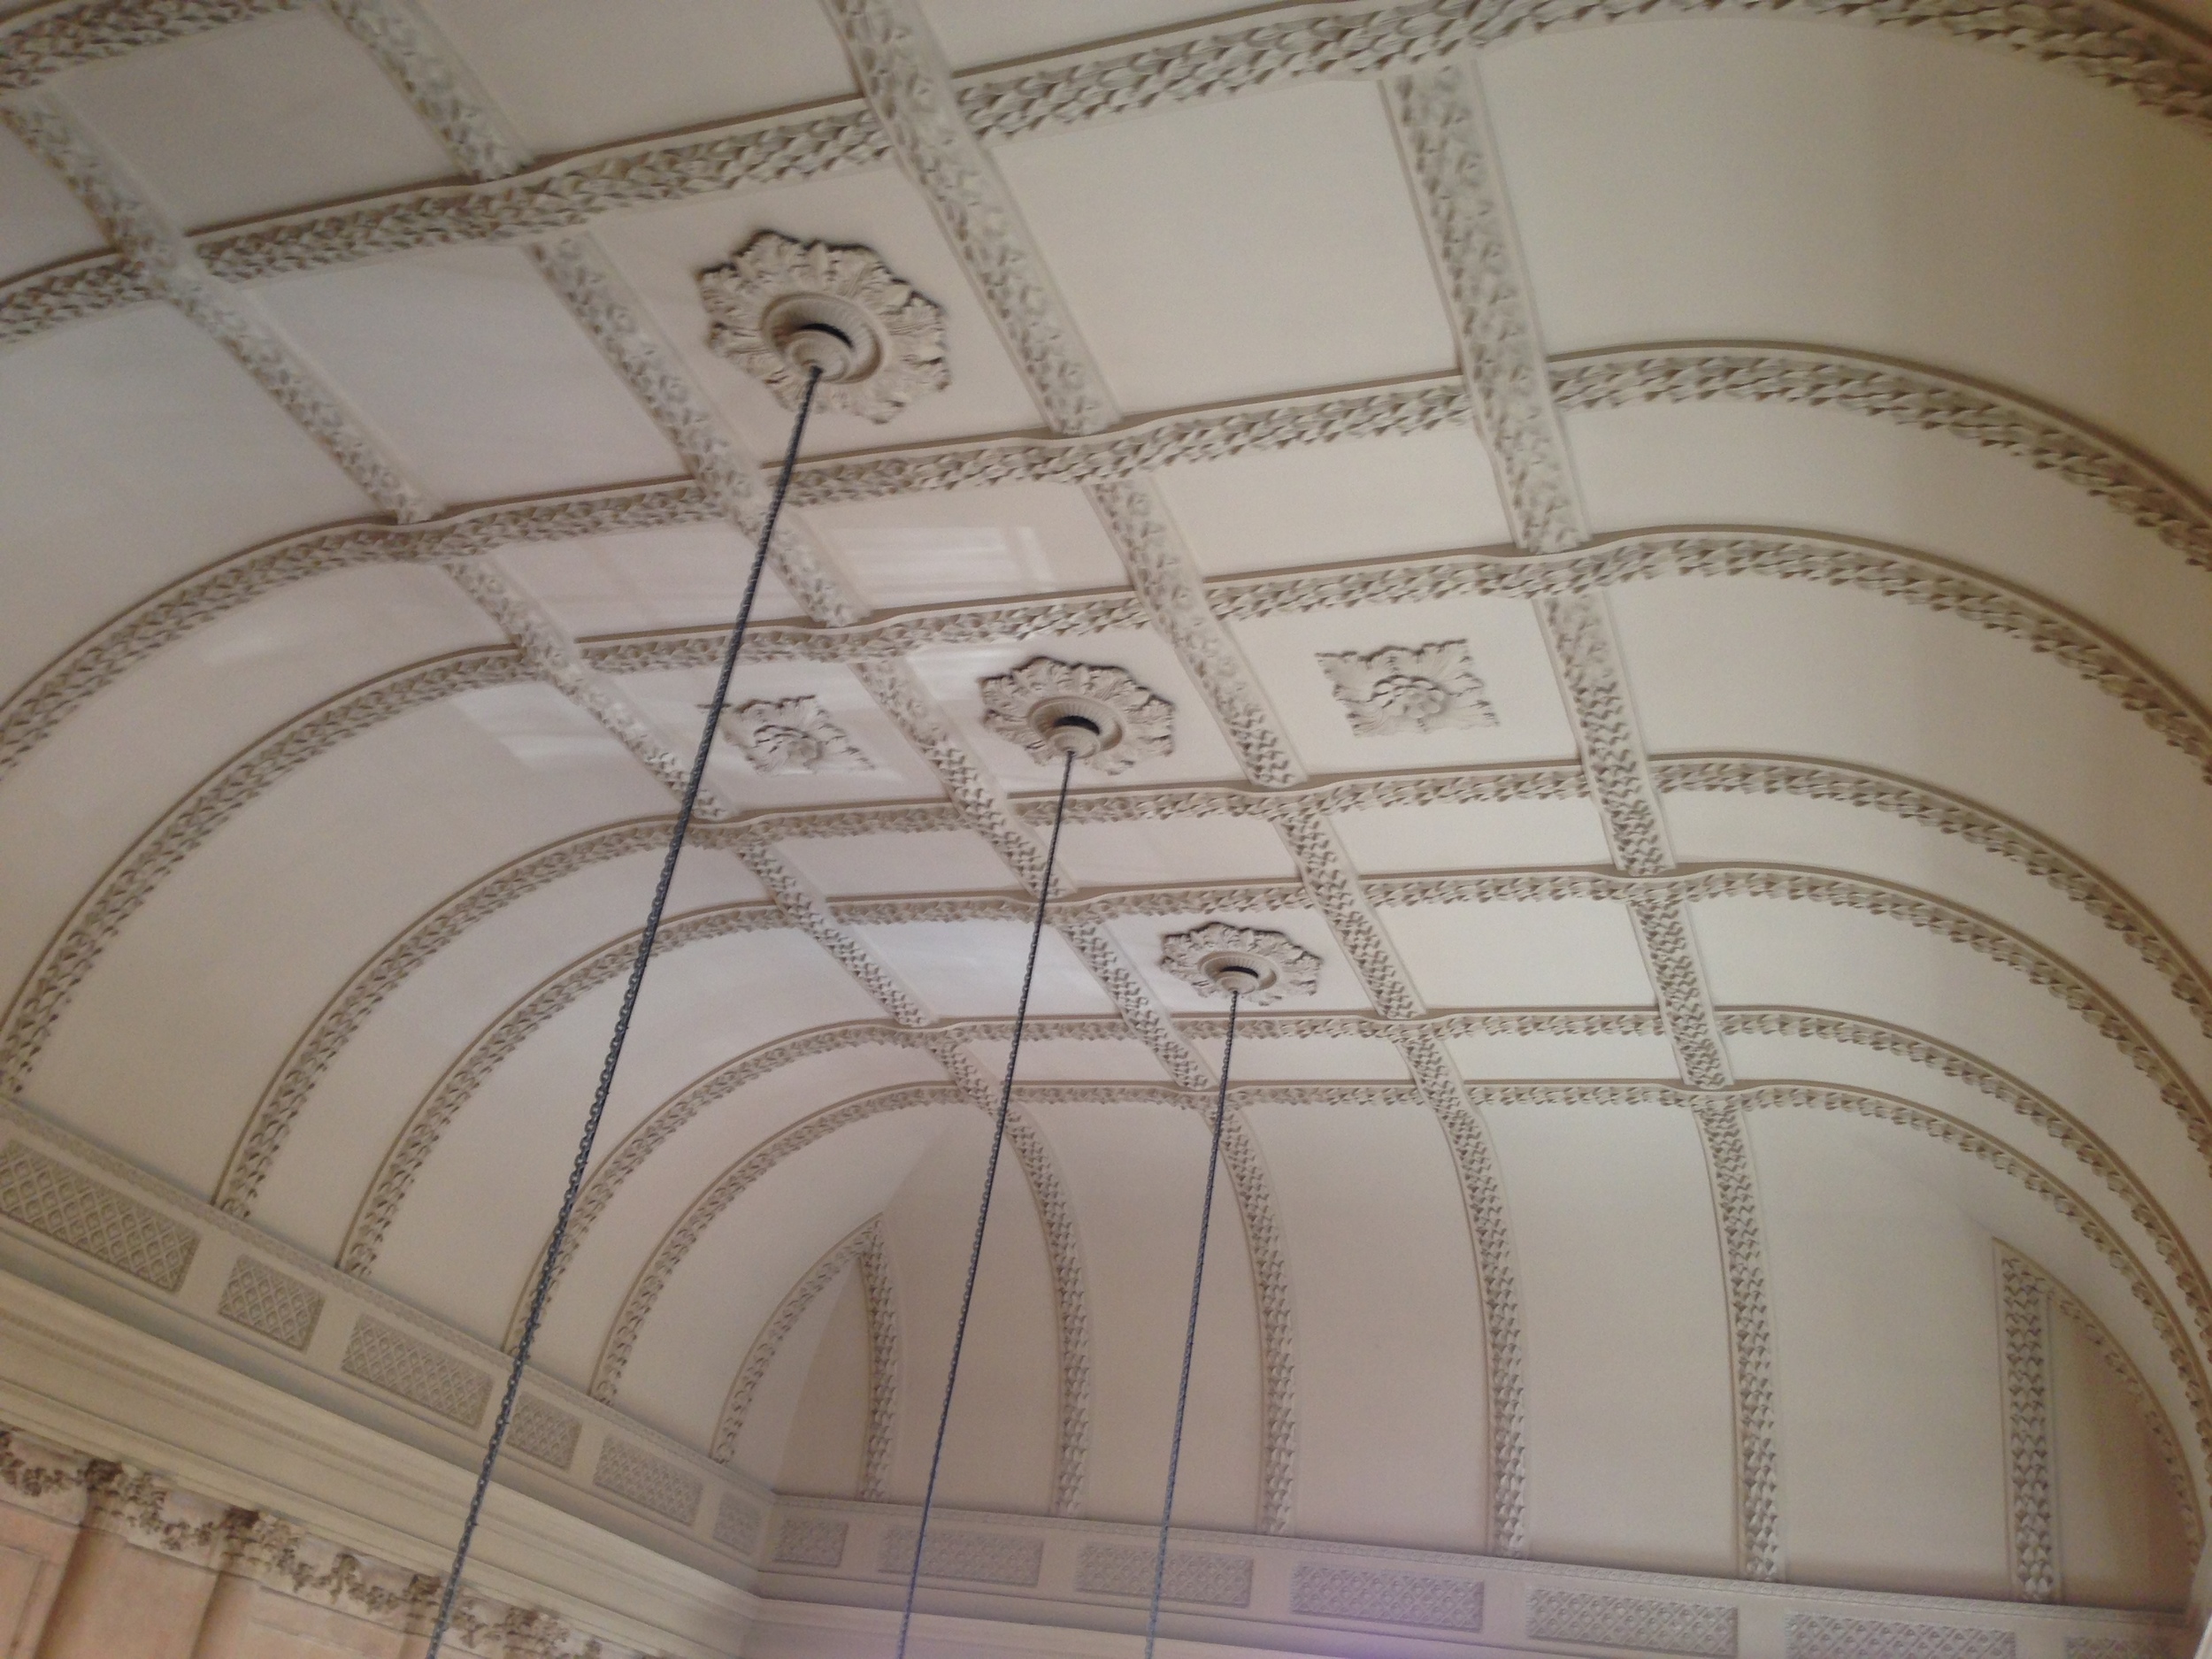  A nice shot of all of the intricate molding and details of the ceiling of one of the rooms. 